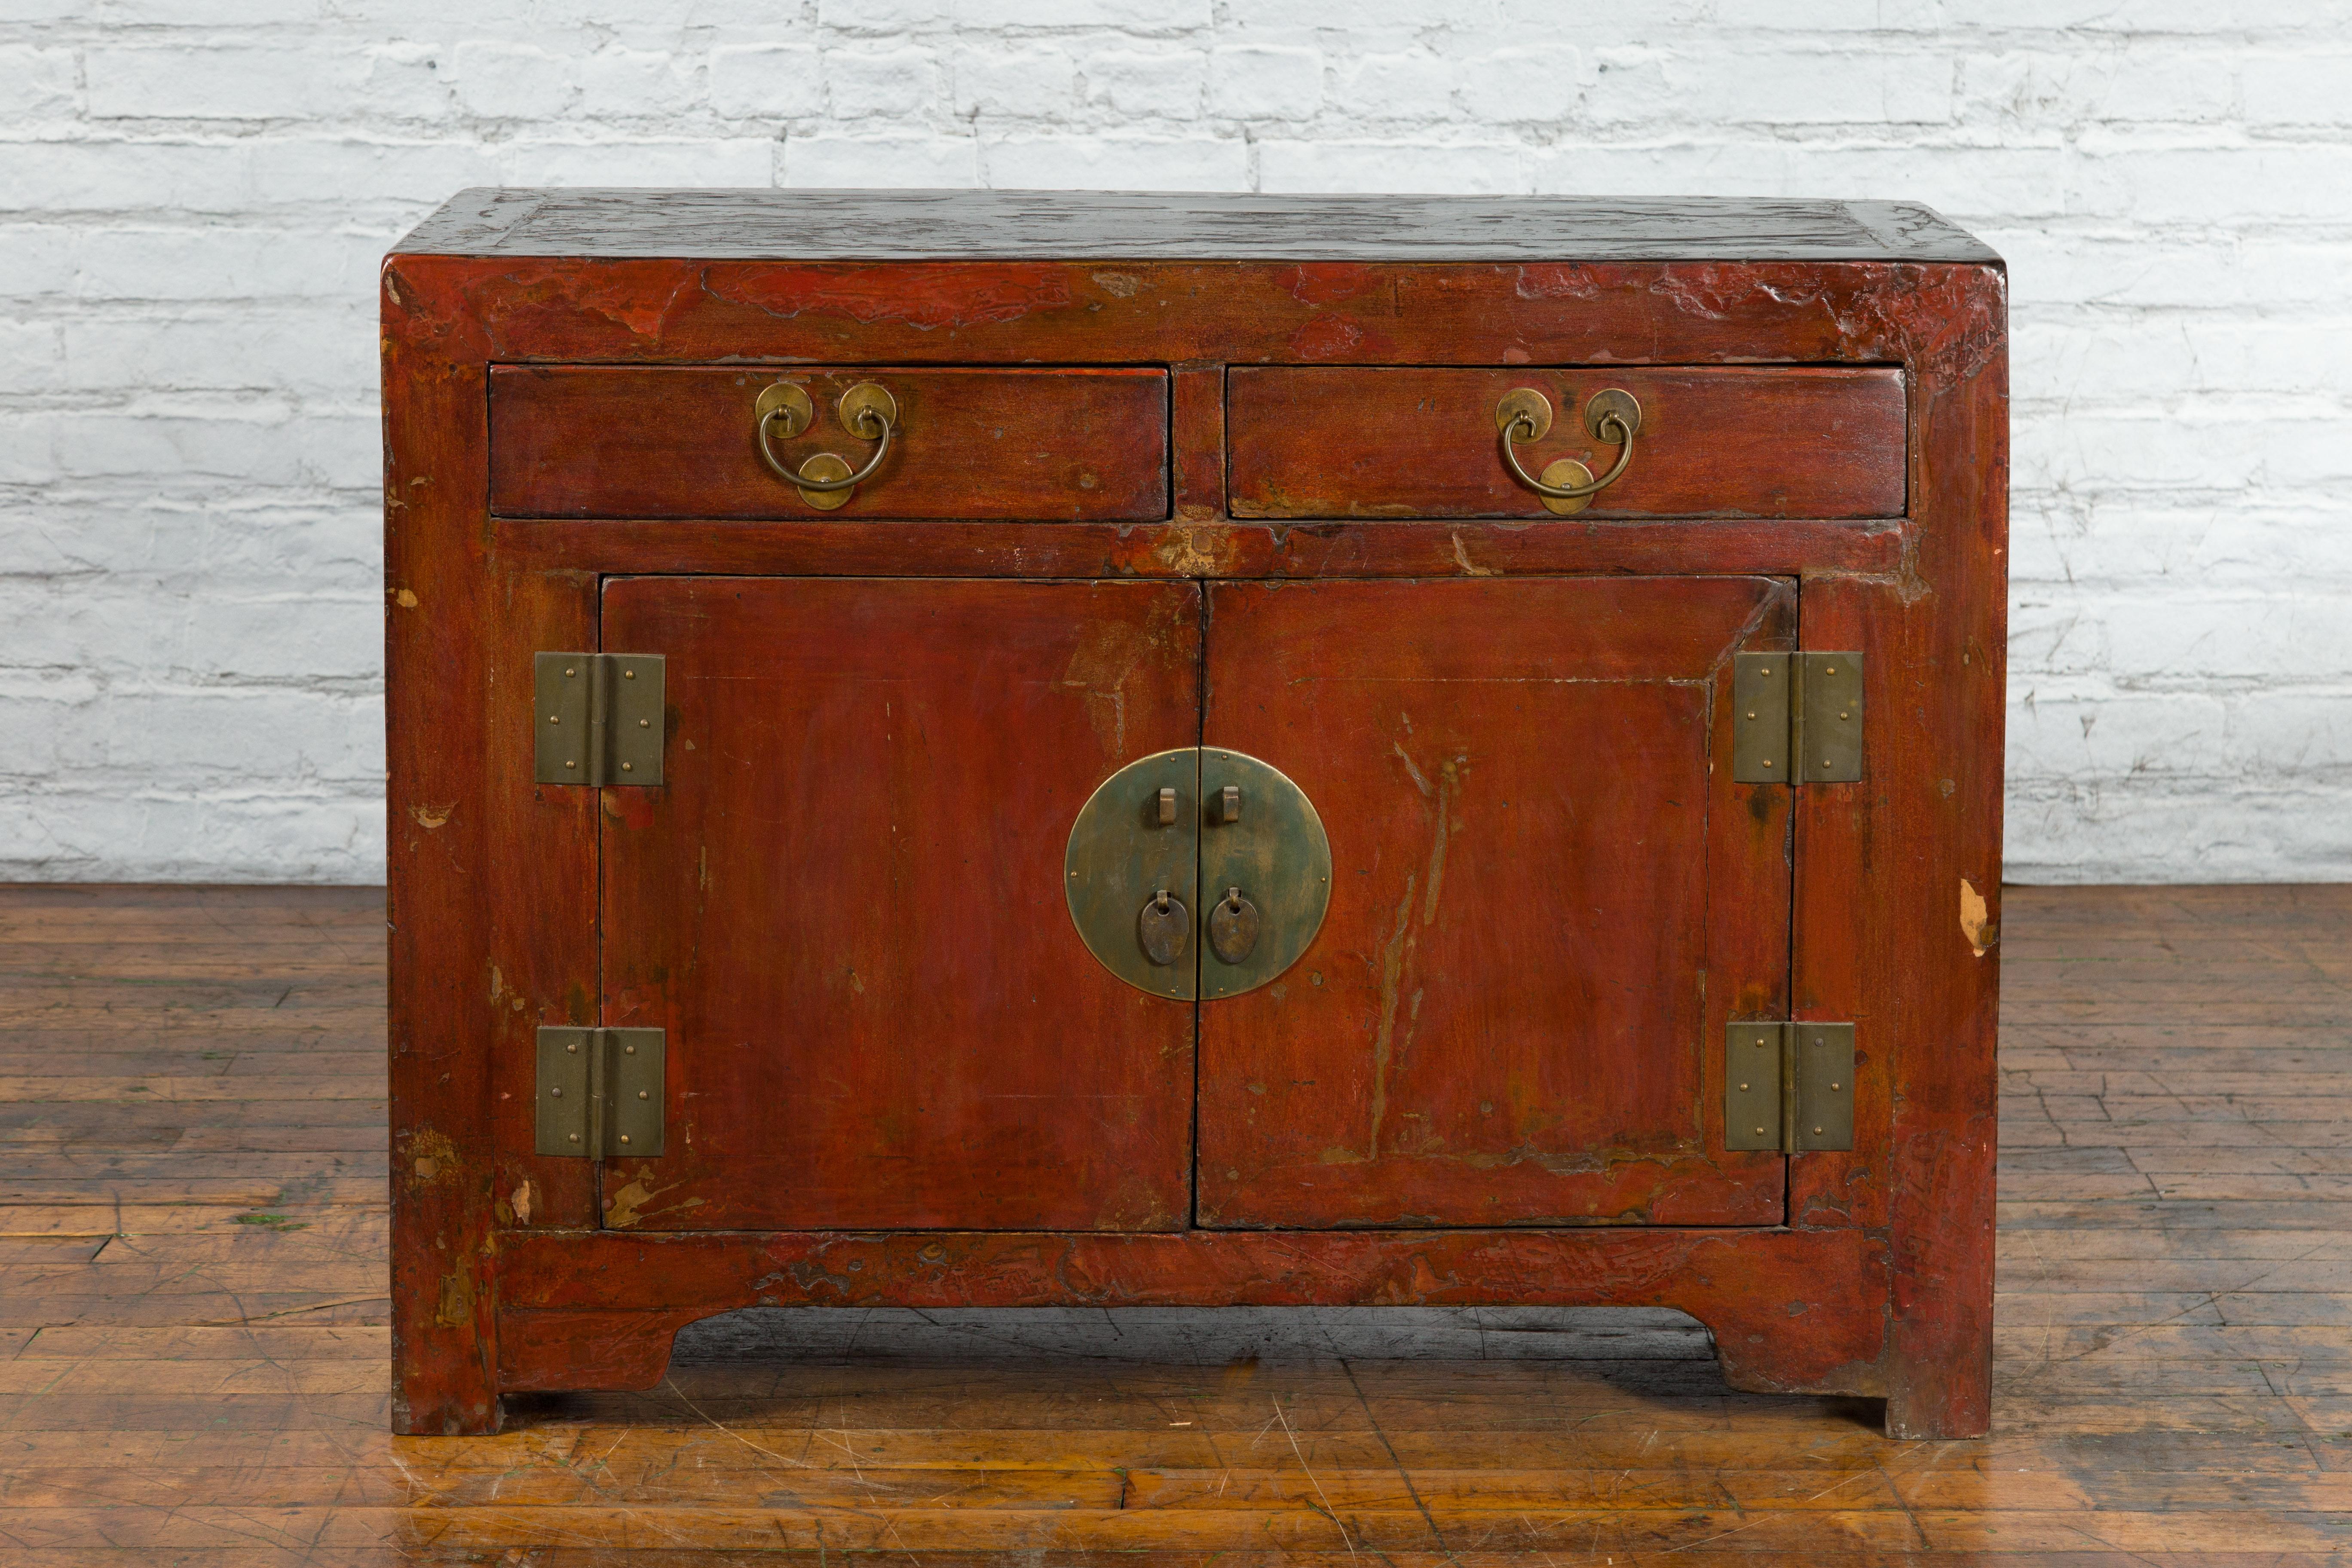 A Chinese Late Qing Dynasty period reddish brown lacquer side cabinet from the early 20th century with two drawers, two doors and brass hardware. Created in China during the Late Qing Dynasty period in the early 20th century, this side cabinet